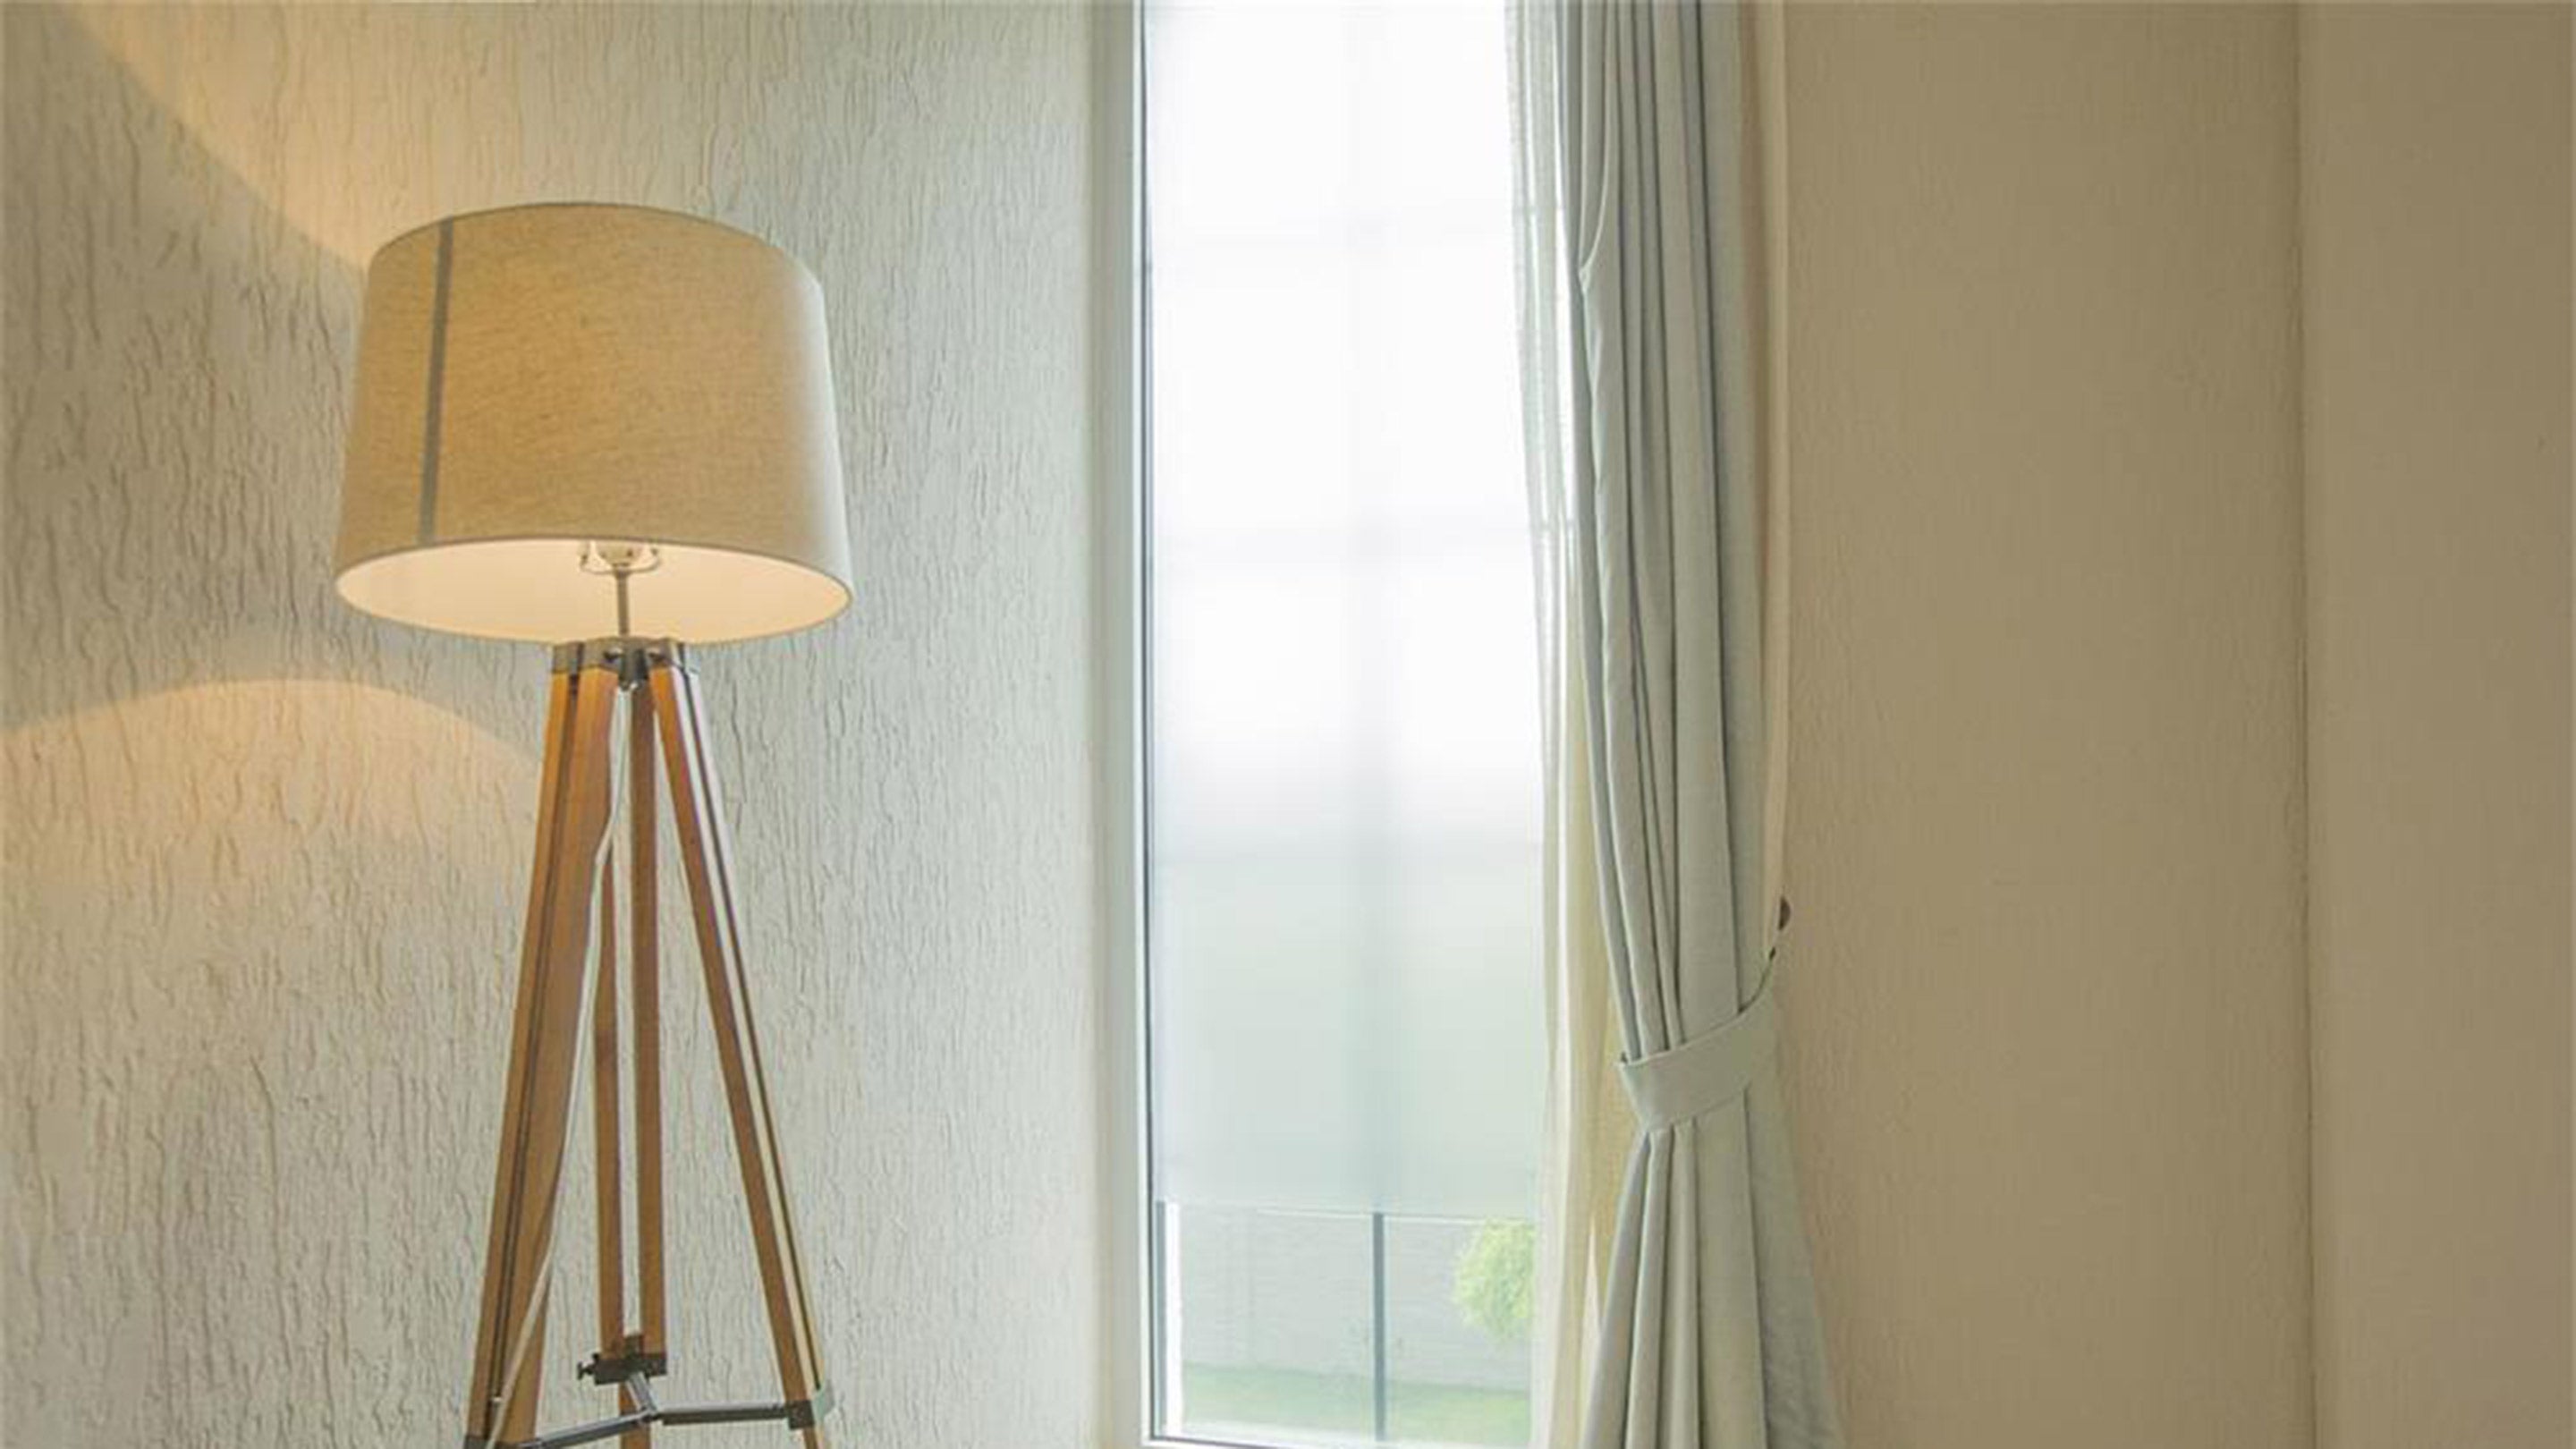 5 Uses for Window Film